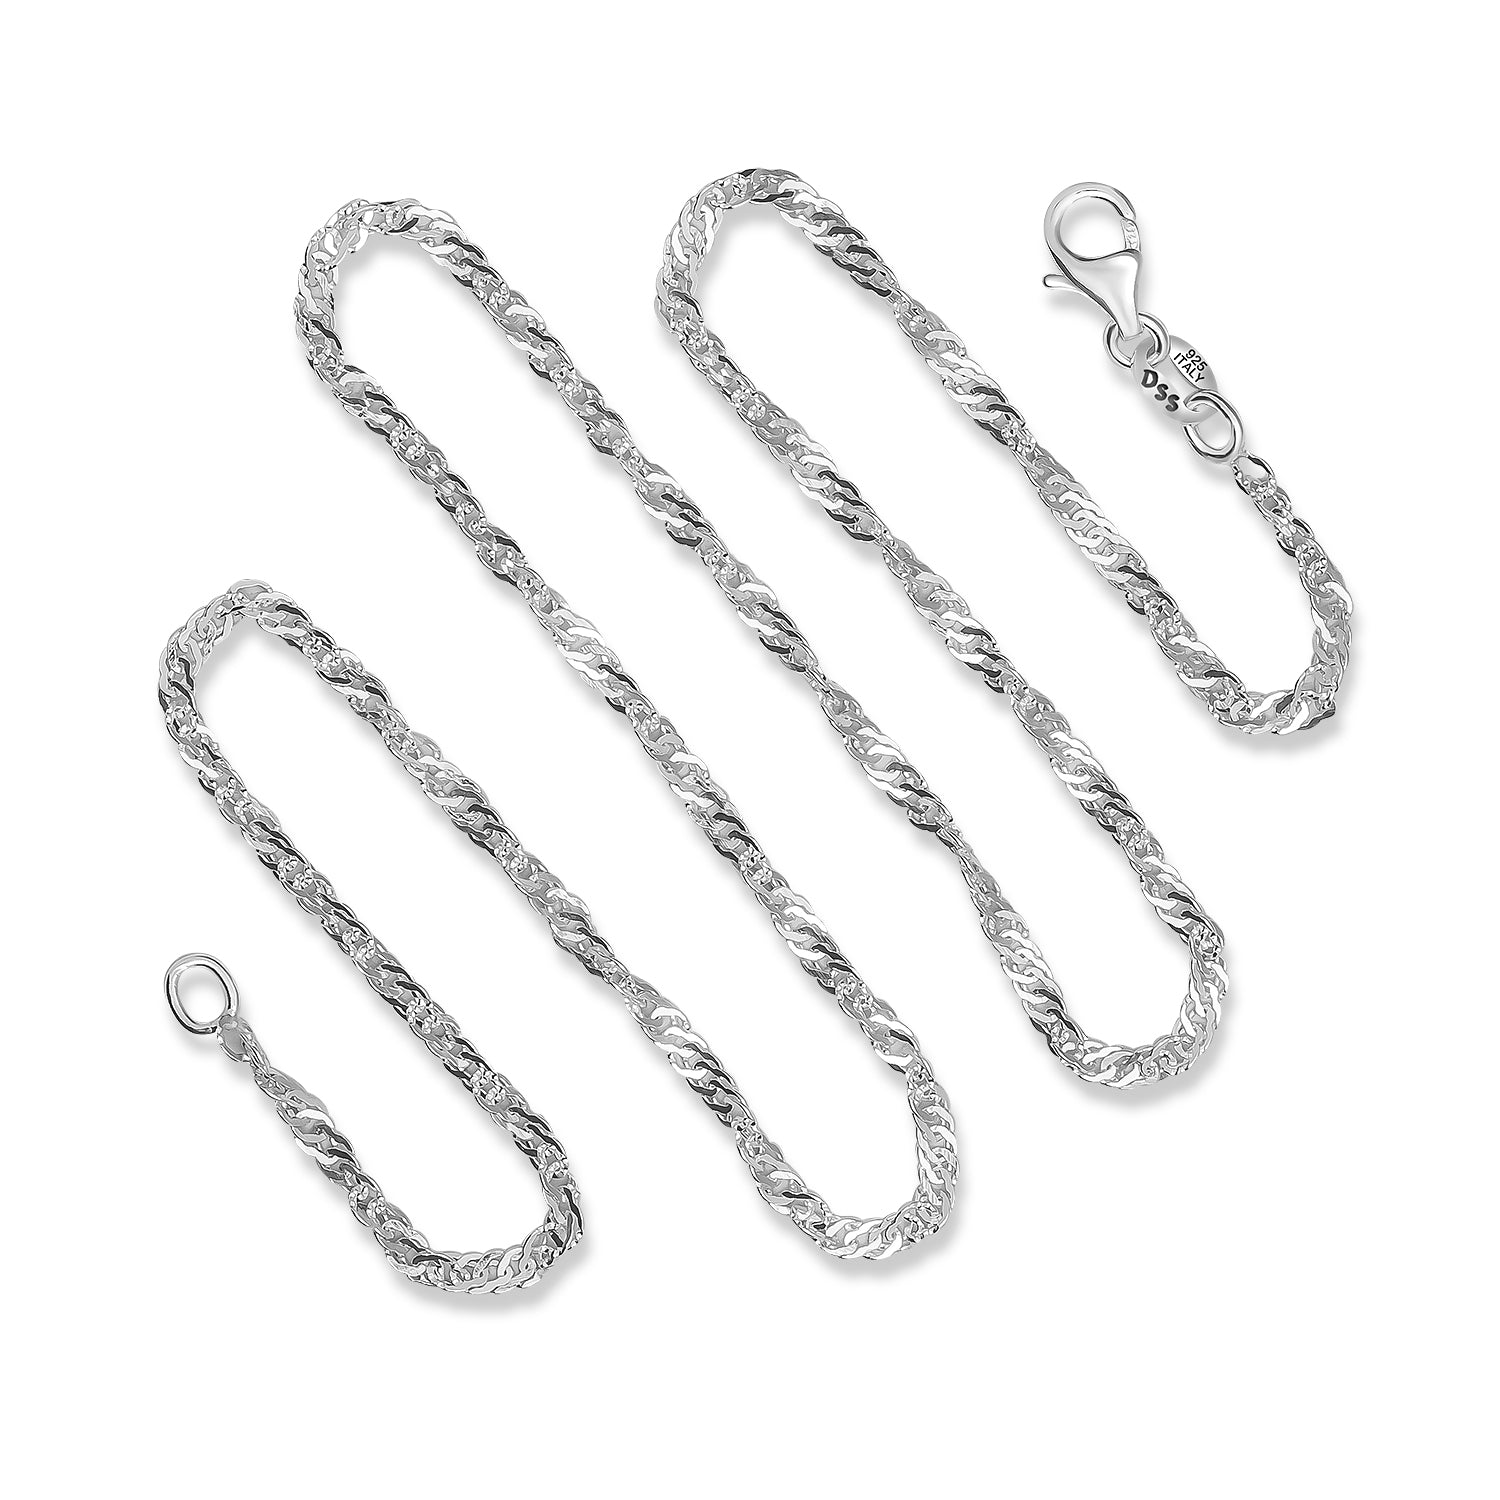 2MM Sterling Silver Singapore Chain with Lobster Claw Clasp.16", 18", 20", 22", 24",30",